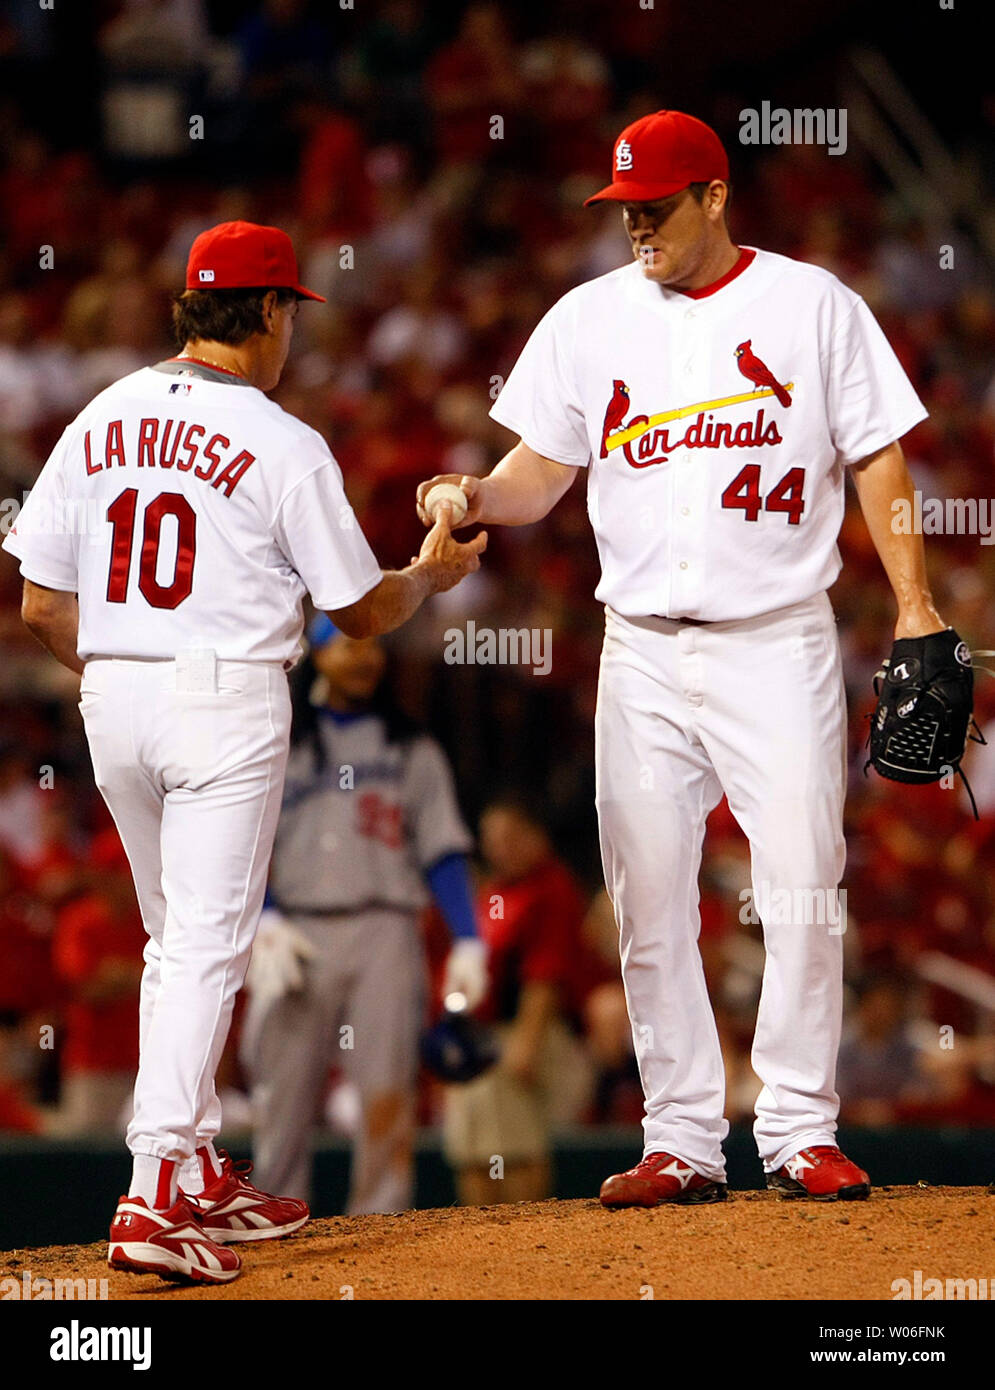 Tony La Russa and the Cards bullpen shine as St. Louis beats